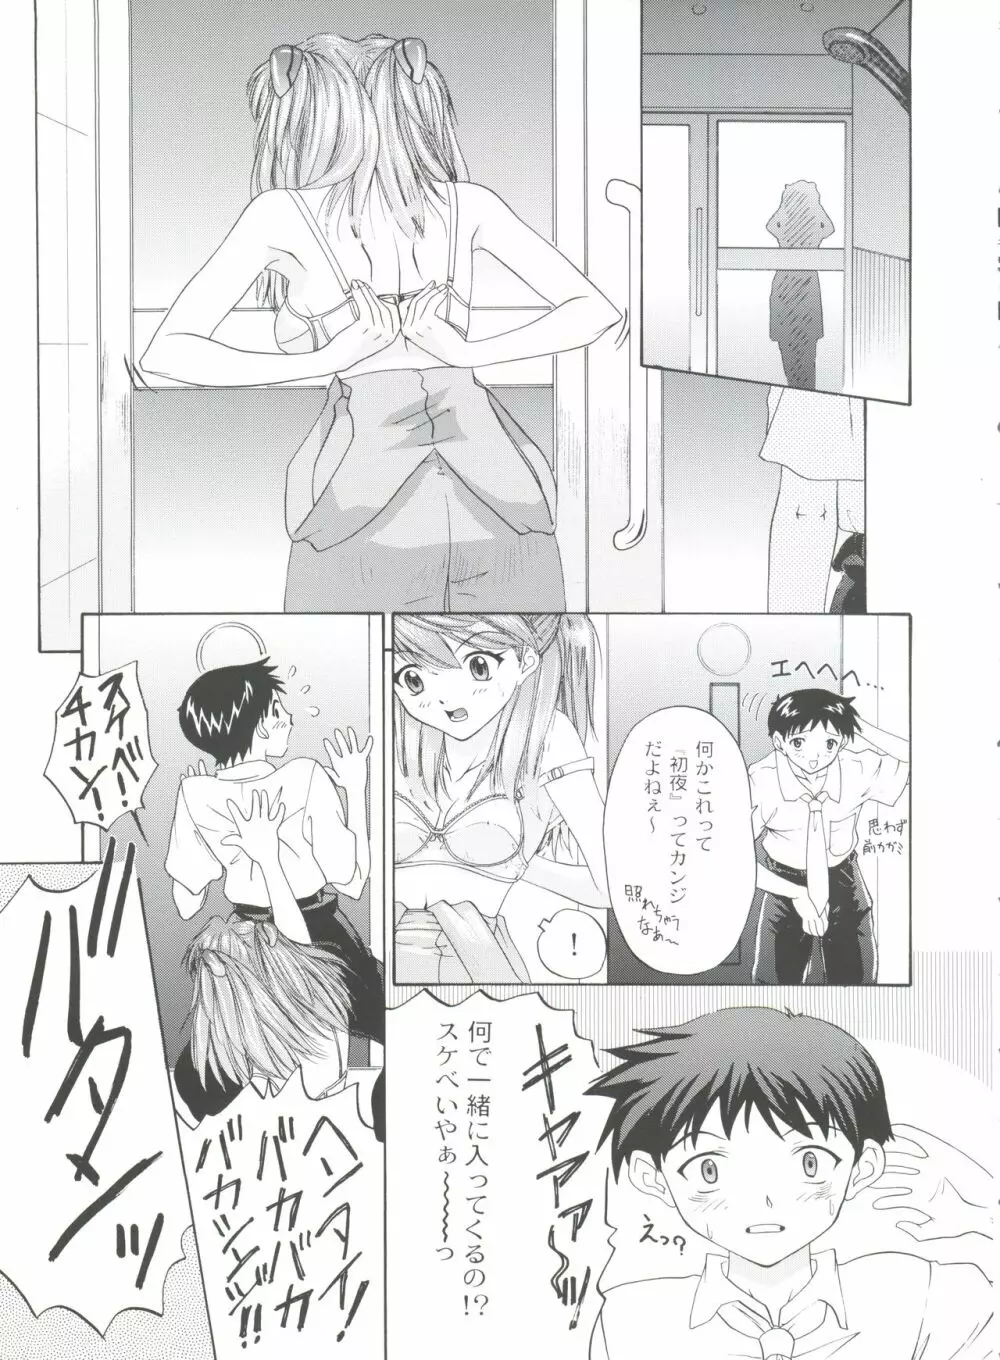 1999 ONLY ASKA - page19